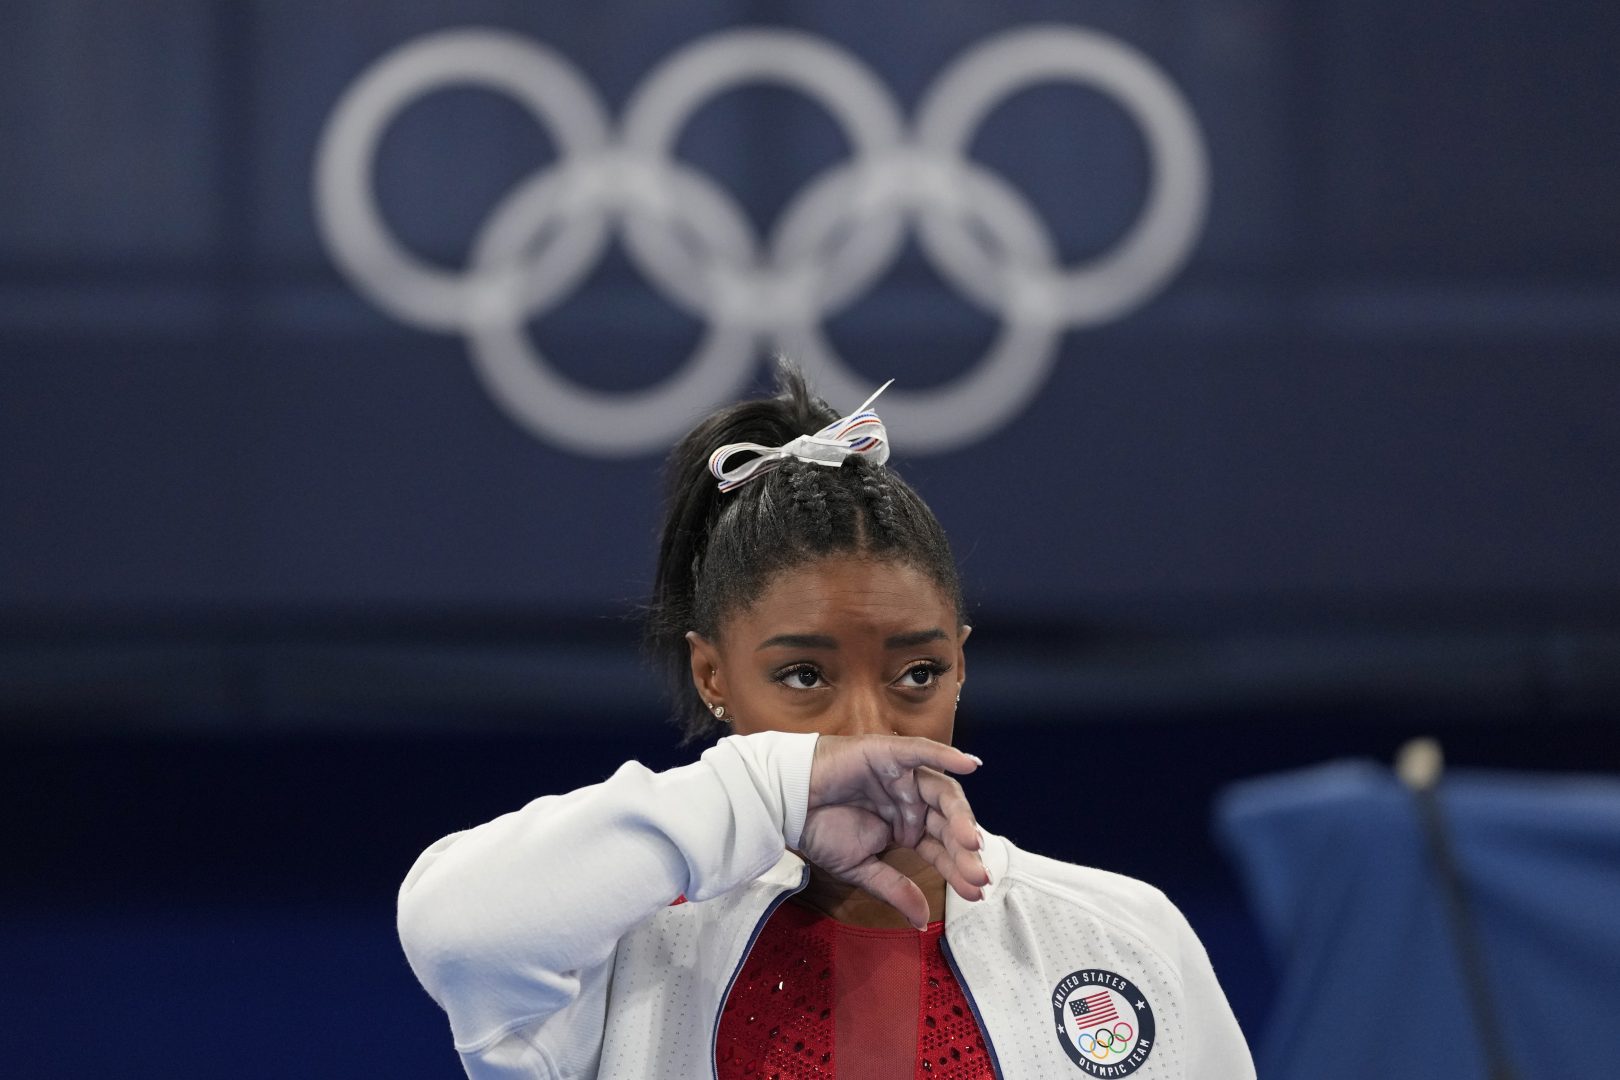 Simone Biles, of the United States, watches gymnasts perform at the 2020 Summer Olympics, Tuesday, July 27, 2021, in Tokyo. Biles says she wasn't in right 'headspace' to compete and withdrew from gymnastics team final to protect herself. 